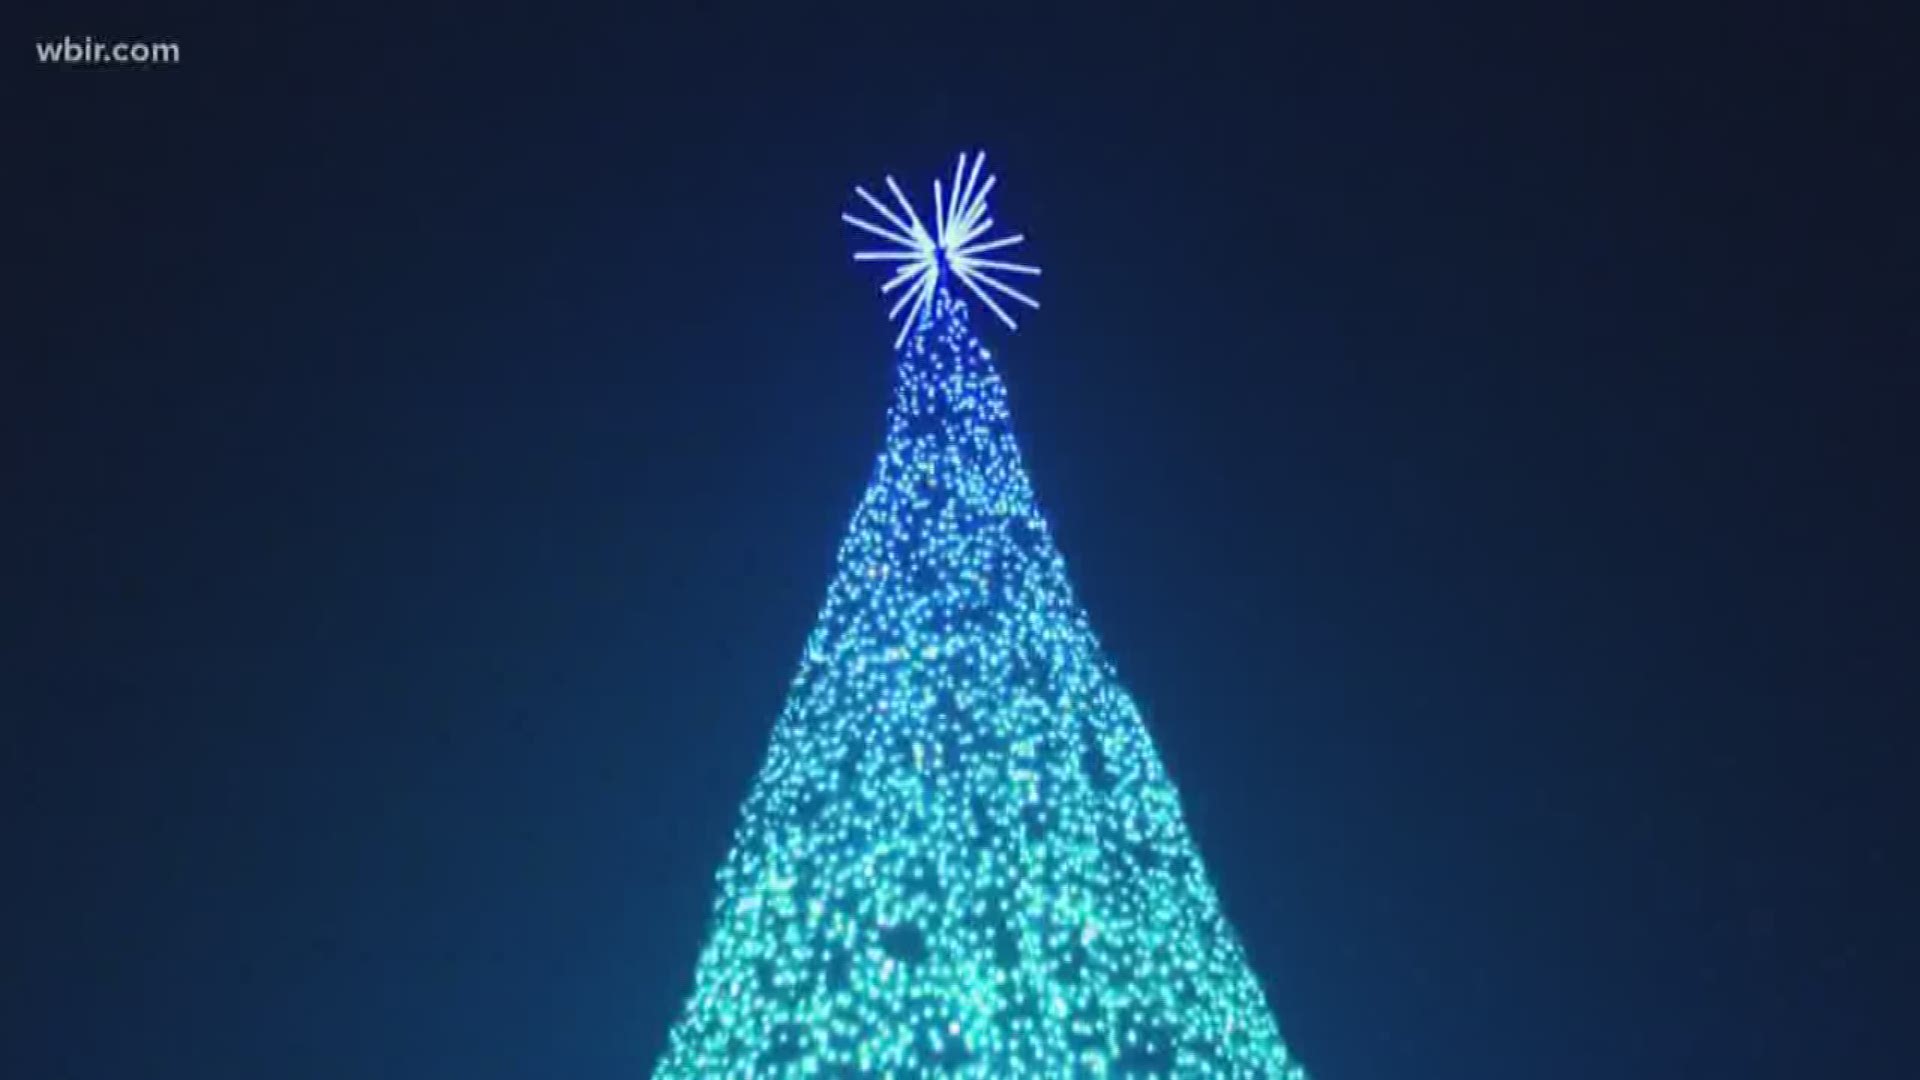 There are millions of sparkling lights and a 50-foot tree.